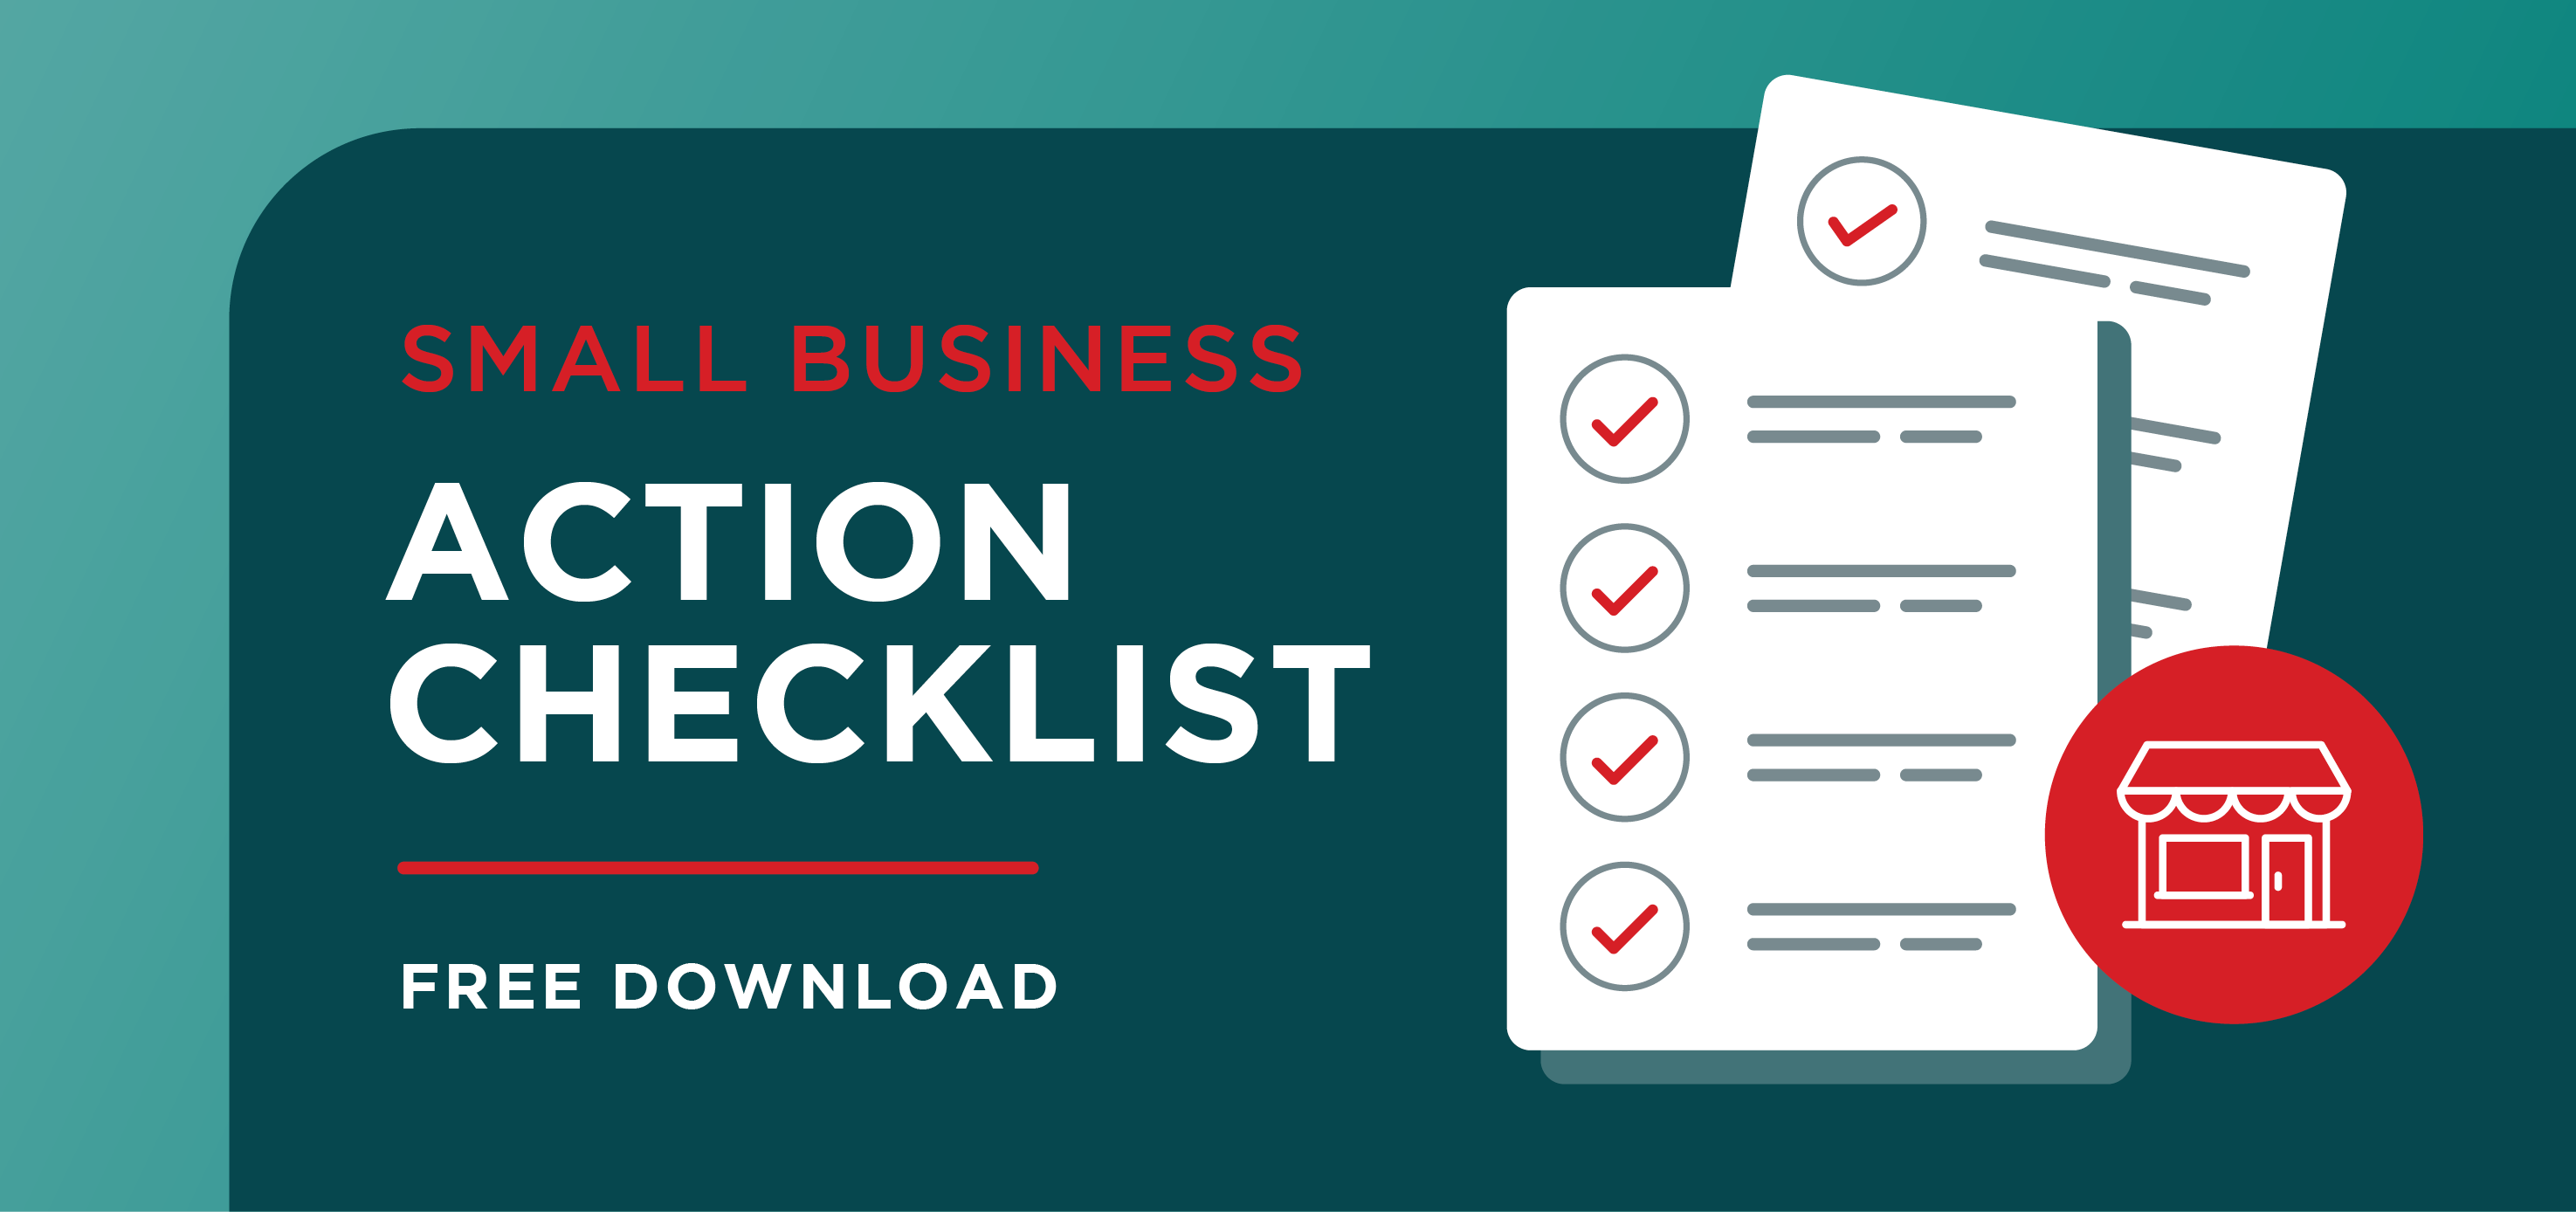 CP_COVID_Small_Business_Checklist_Secondary_Blog_708x333.png